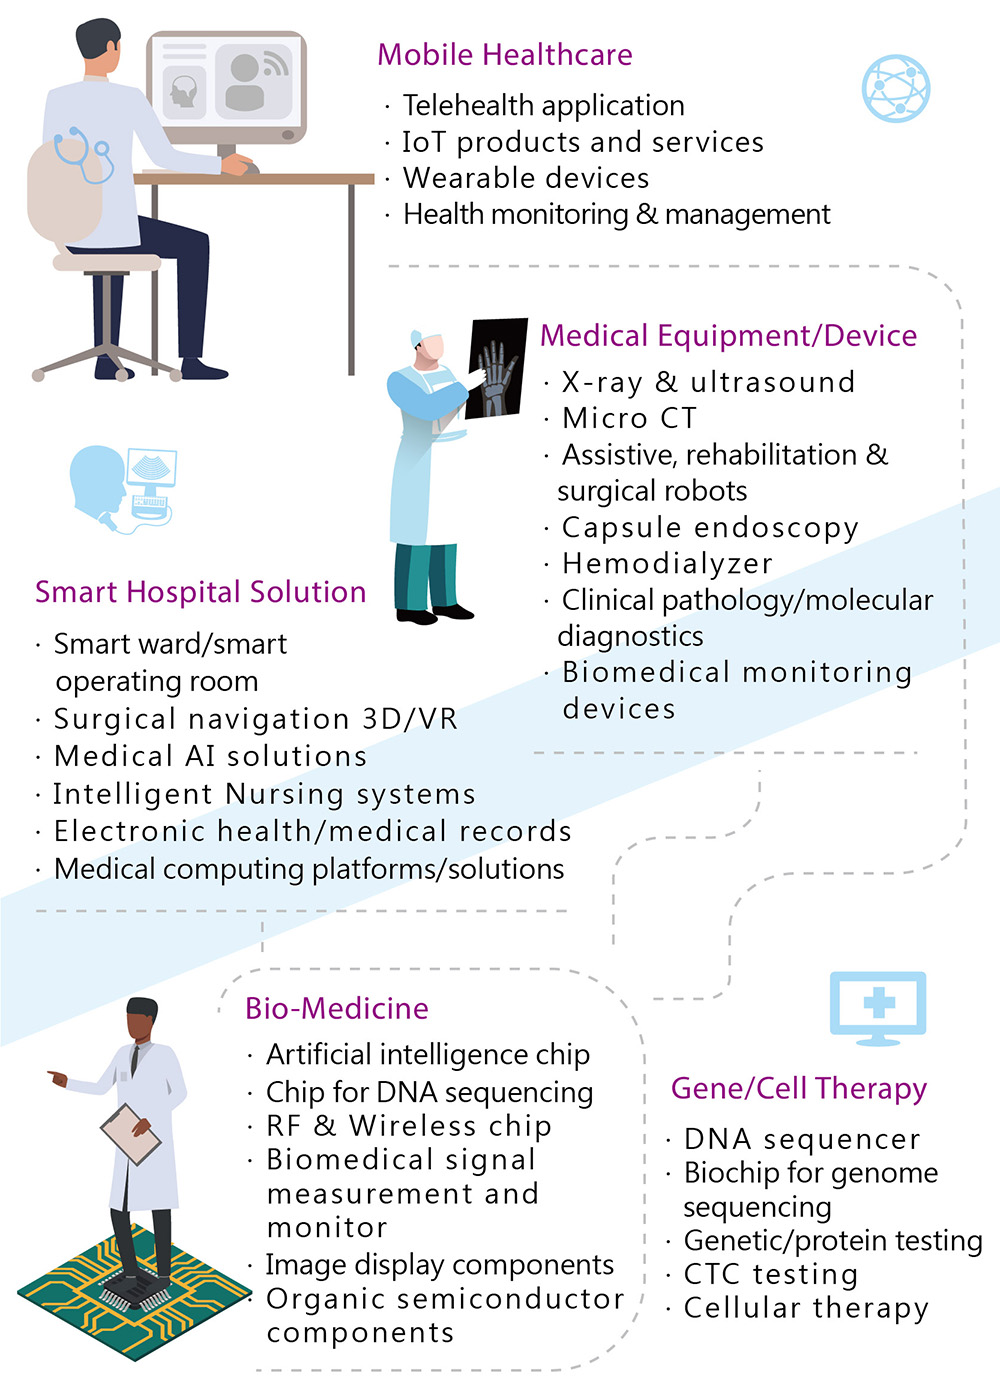  Mobile Healthcare/Medical Equipment/Device/Smart Hospital Solution/Bio-Medicine/Gene/Cell Therapy